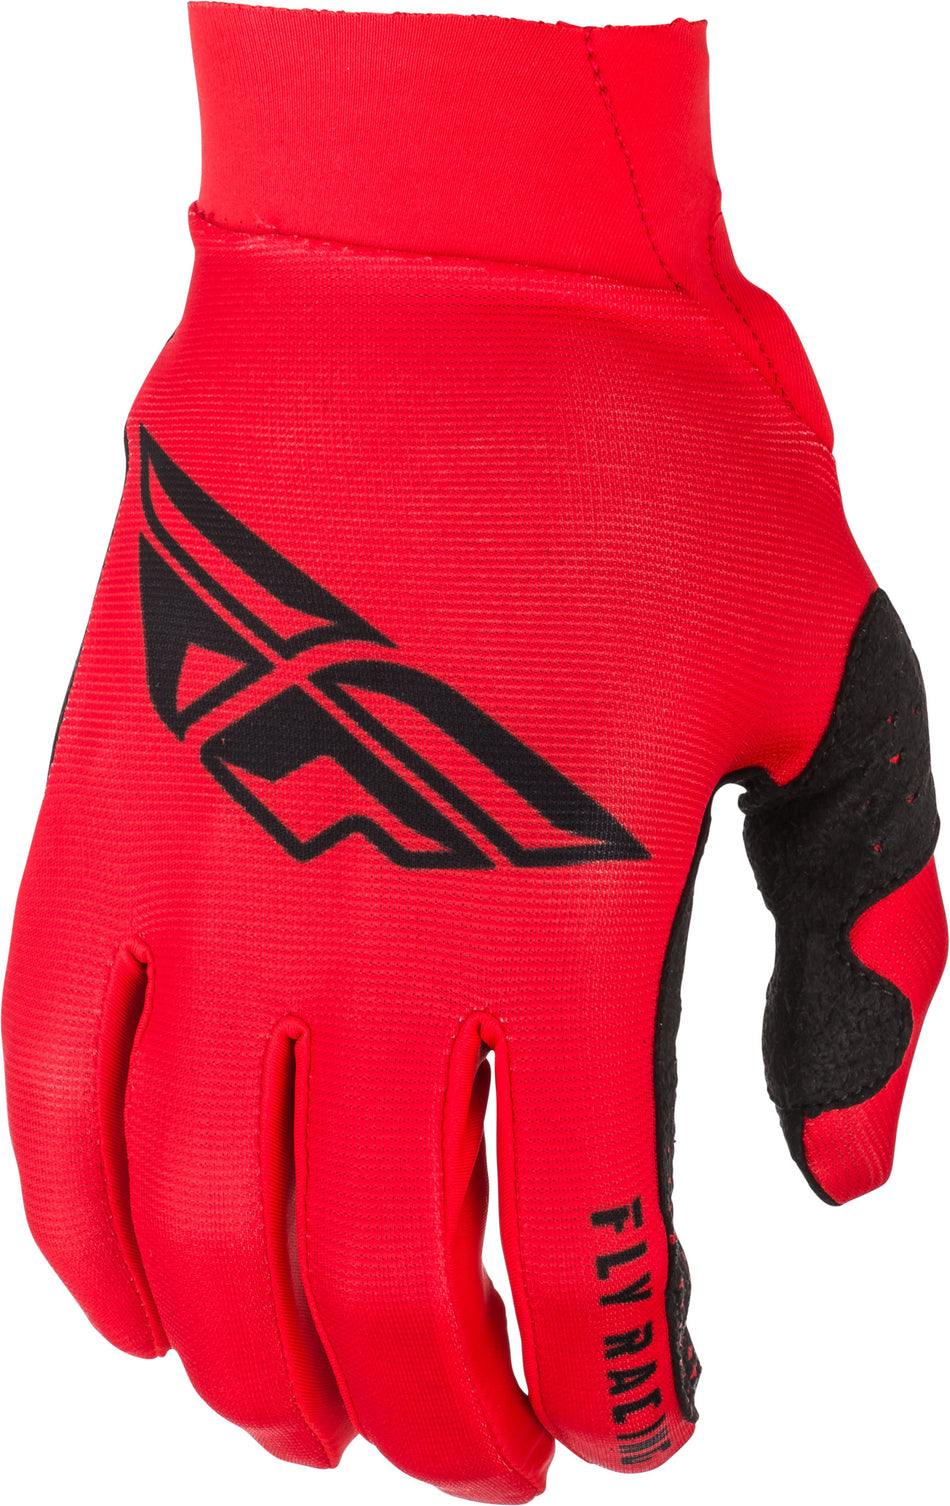 FLY RACING Pro Lite Gloves Red/Black Sz 12 372-81212